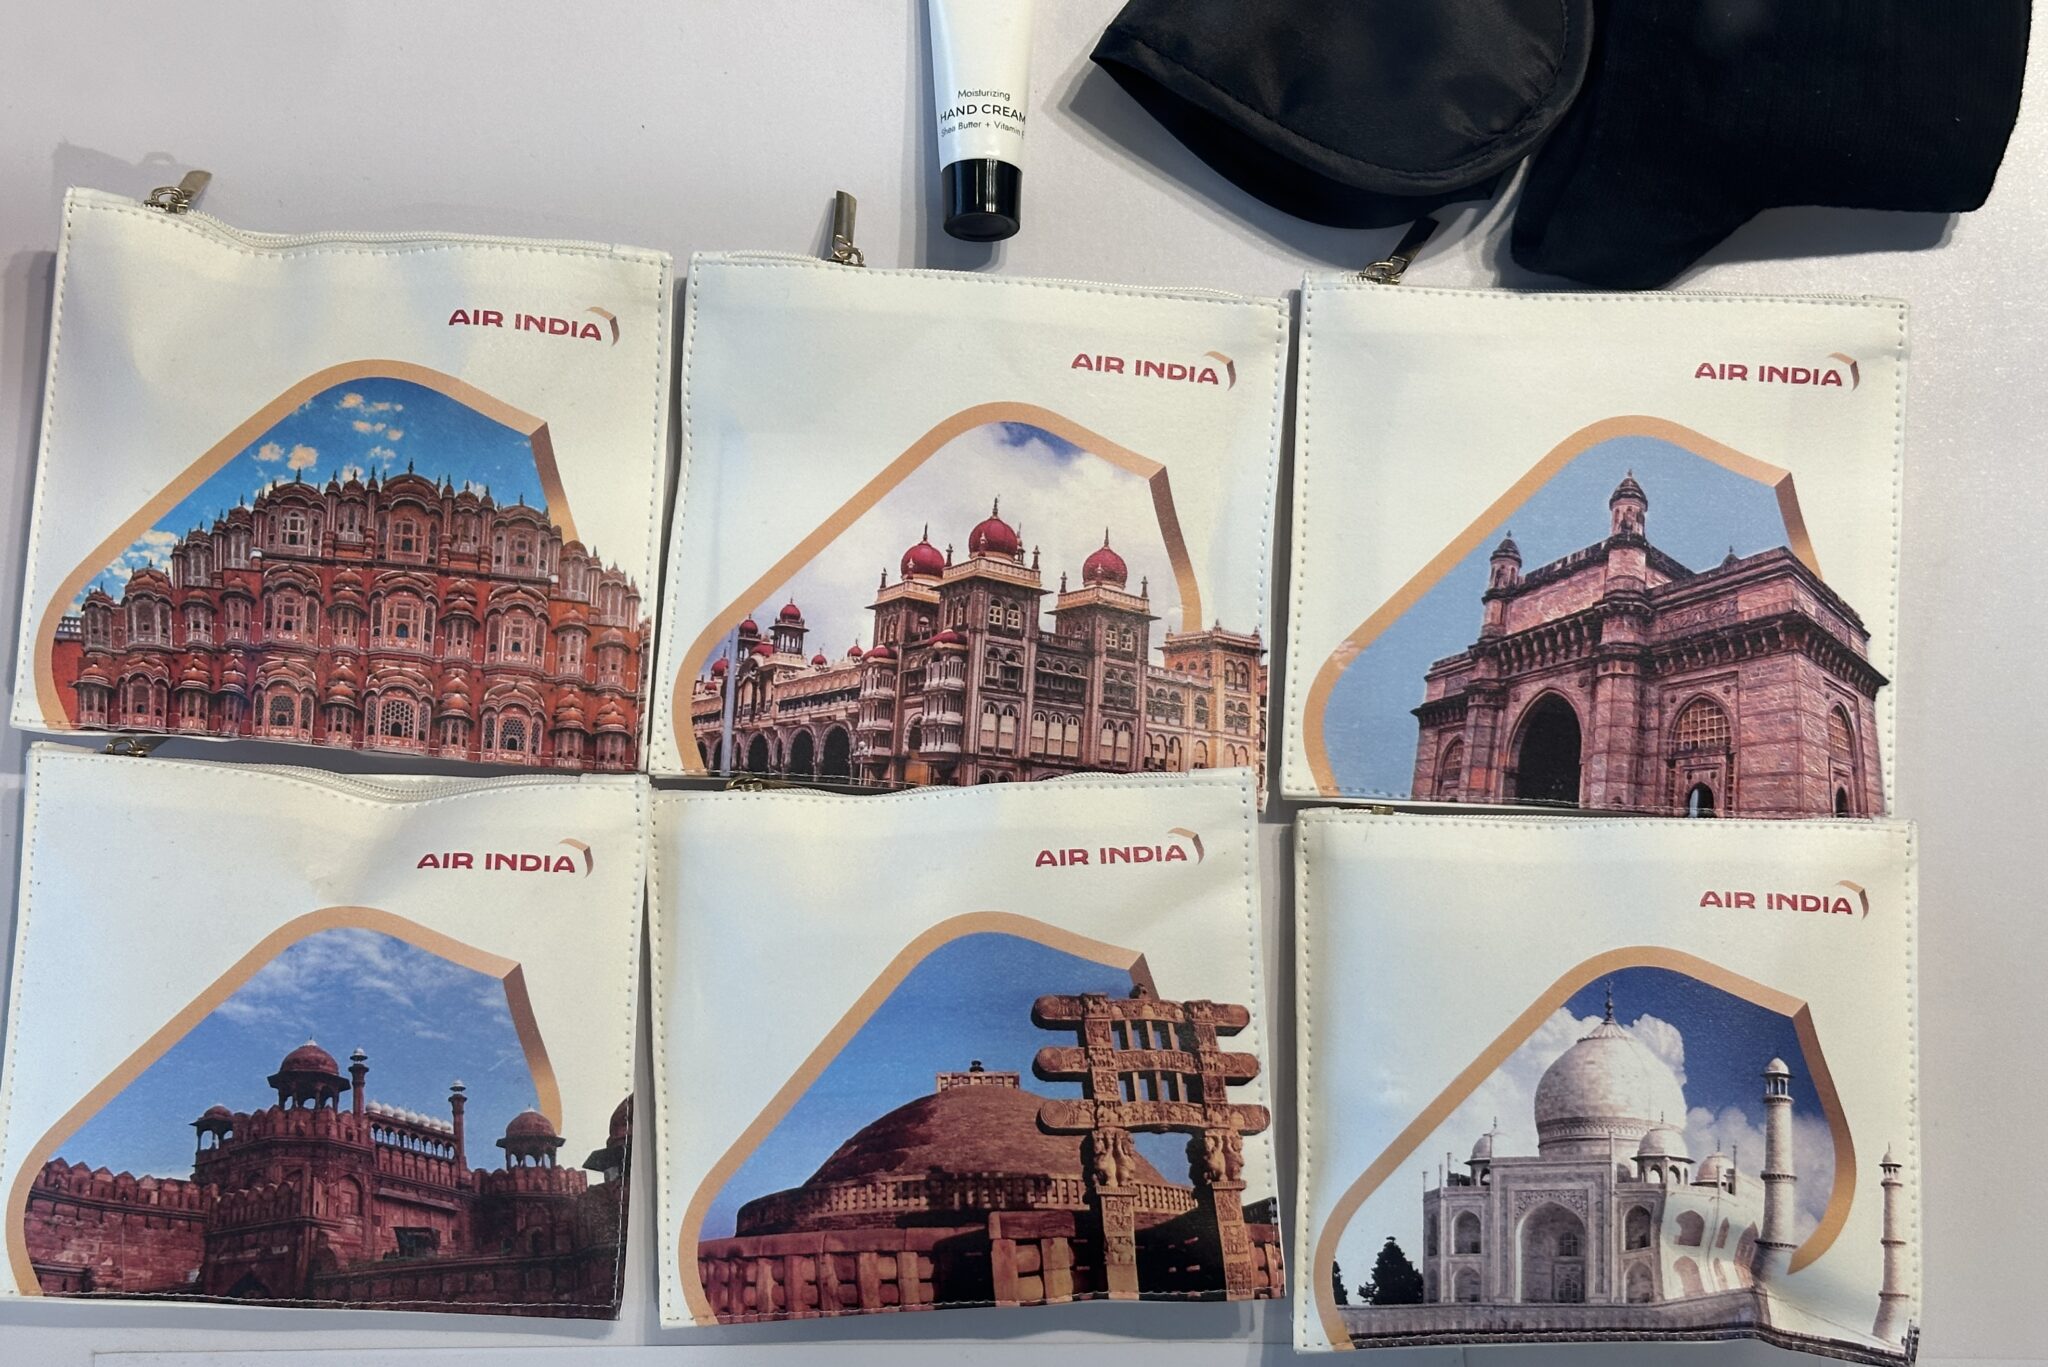 a group of bags with pictures of buildings and a black case